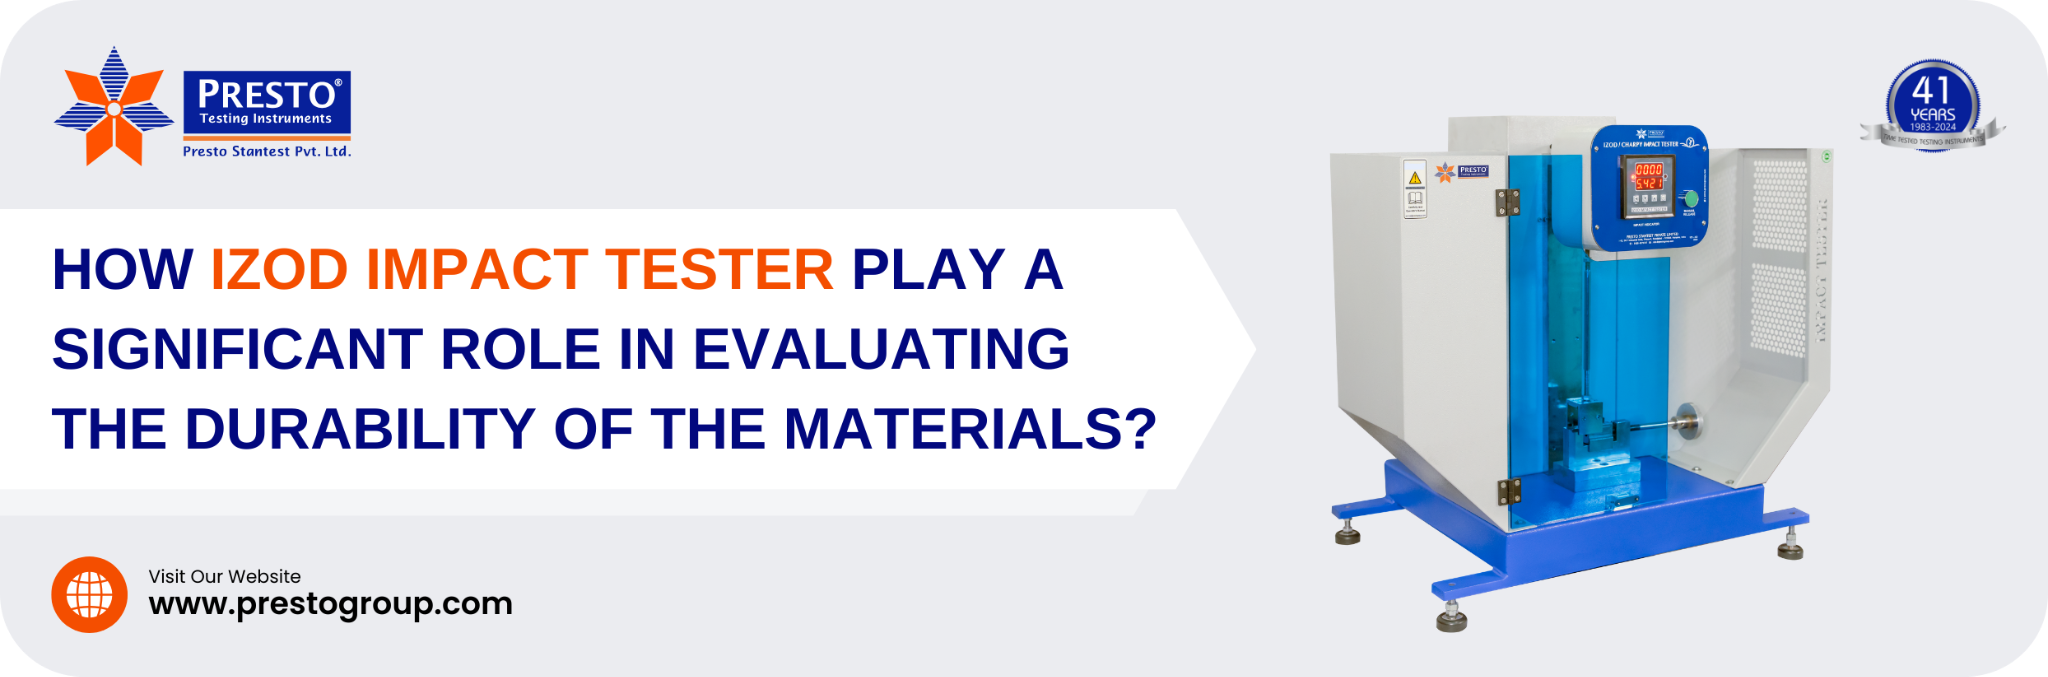 How Izod Impact Tester Play a Significant Role in Evaluating the Durability of the Materials?